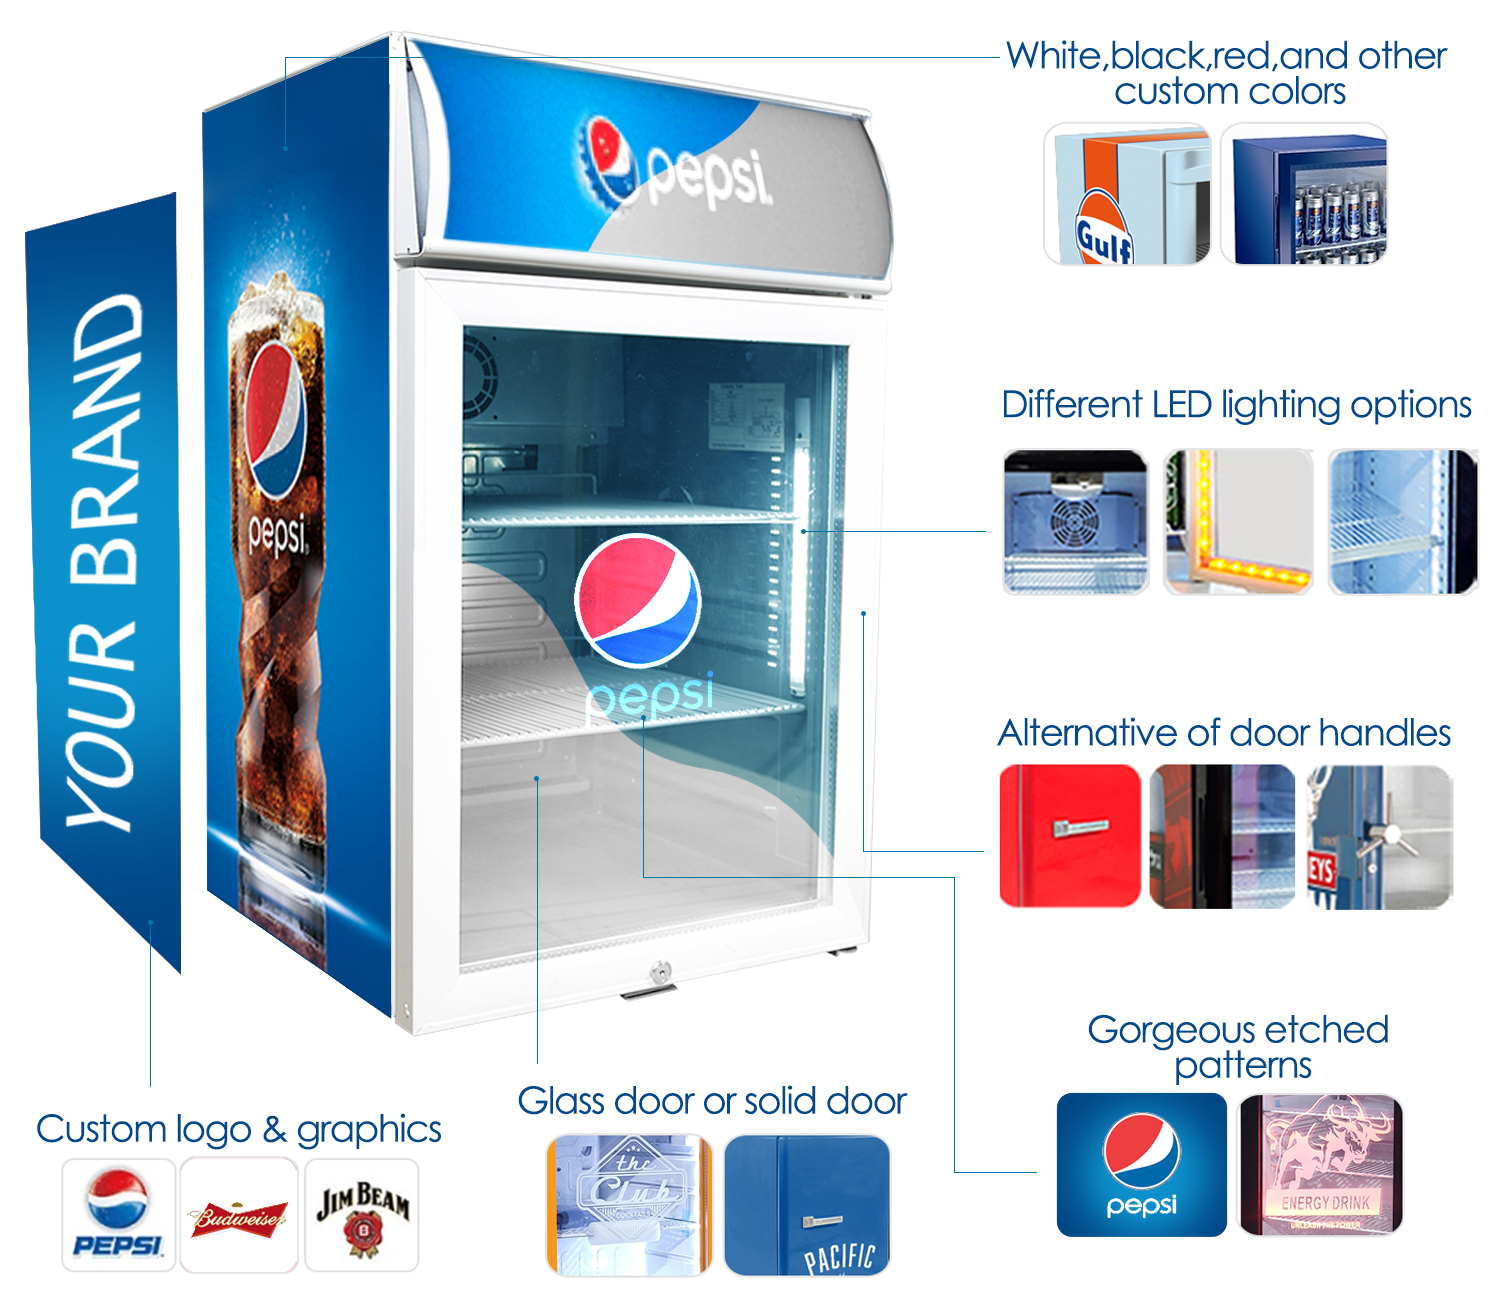 Customed Options - Cusom-Branded Mini And Upright Display Fridges And Coolers For Pepsi Cola Promotion